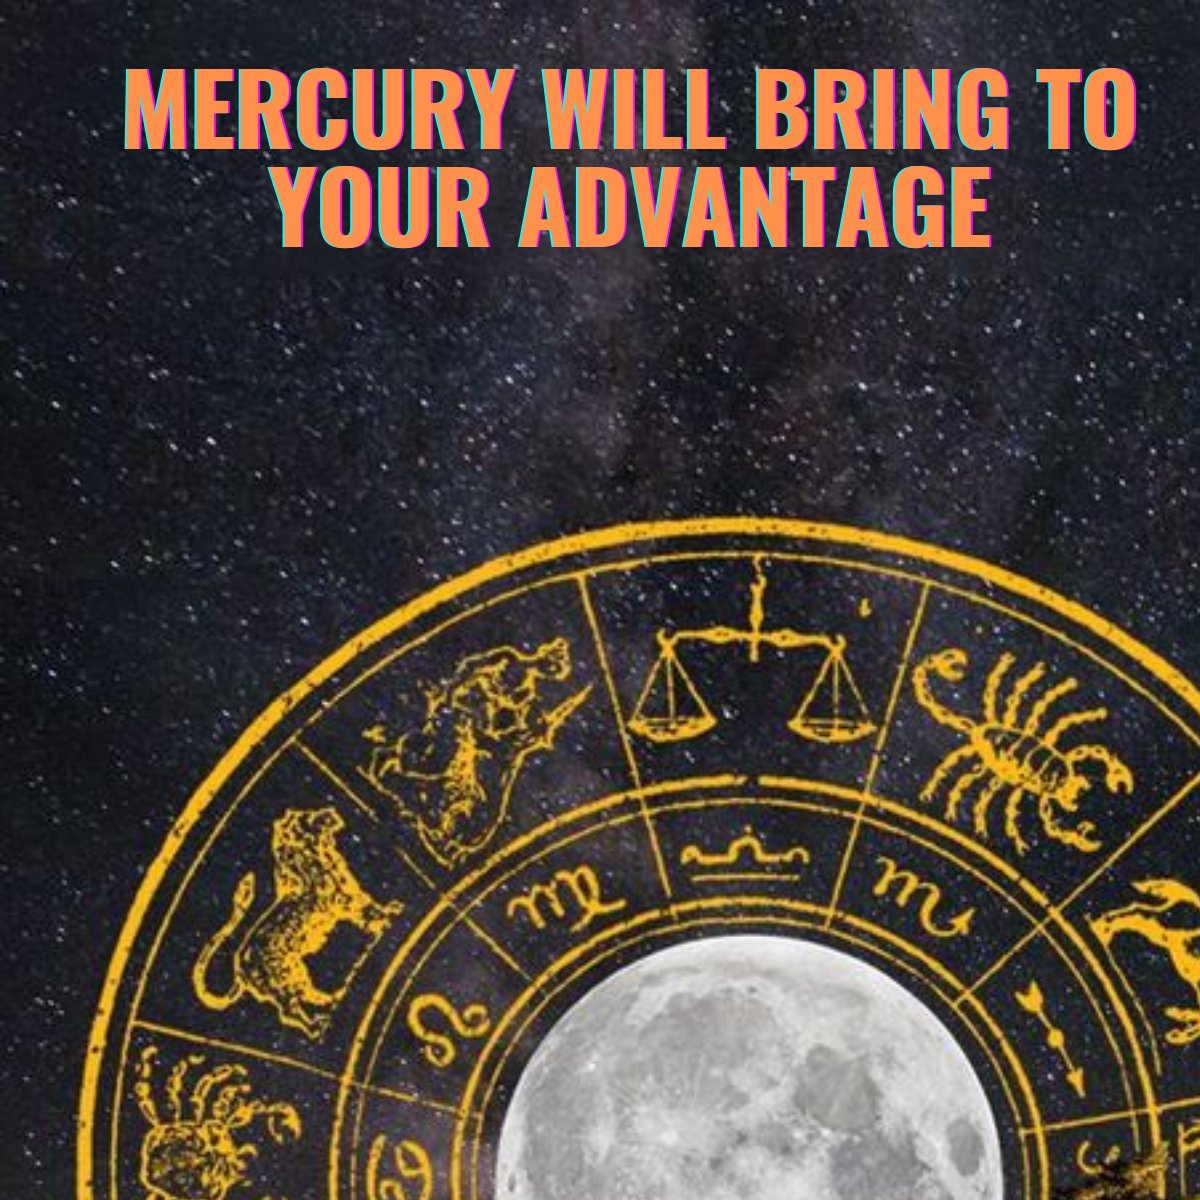 Mercury enters Gemini on June 12th, boosting our communication skills and intellectual pursuits. It's a great time for learning, networking, and expressing your ideas.📚👉 ltx.bio/astralcoach #astrology #sexcompatibility #zodiac #love #soulmate #relationship #horoscope